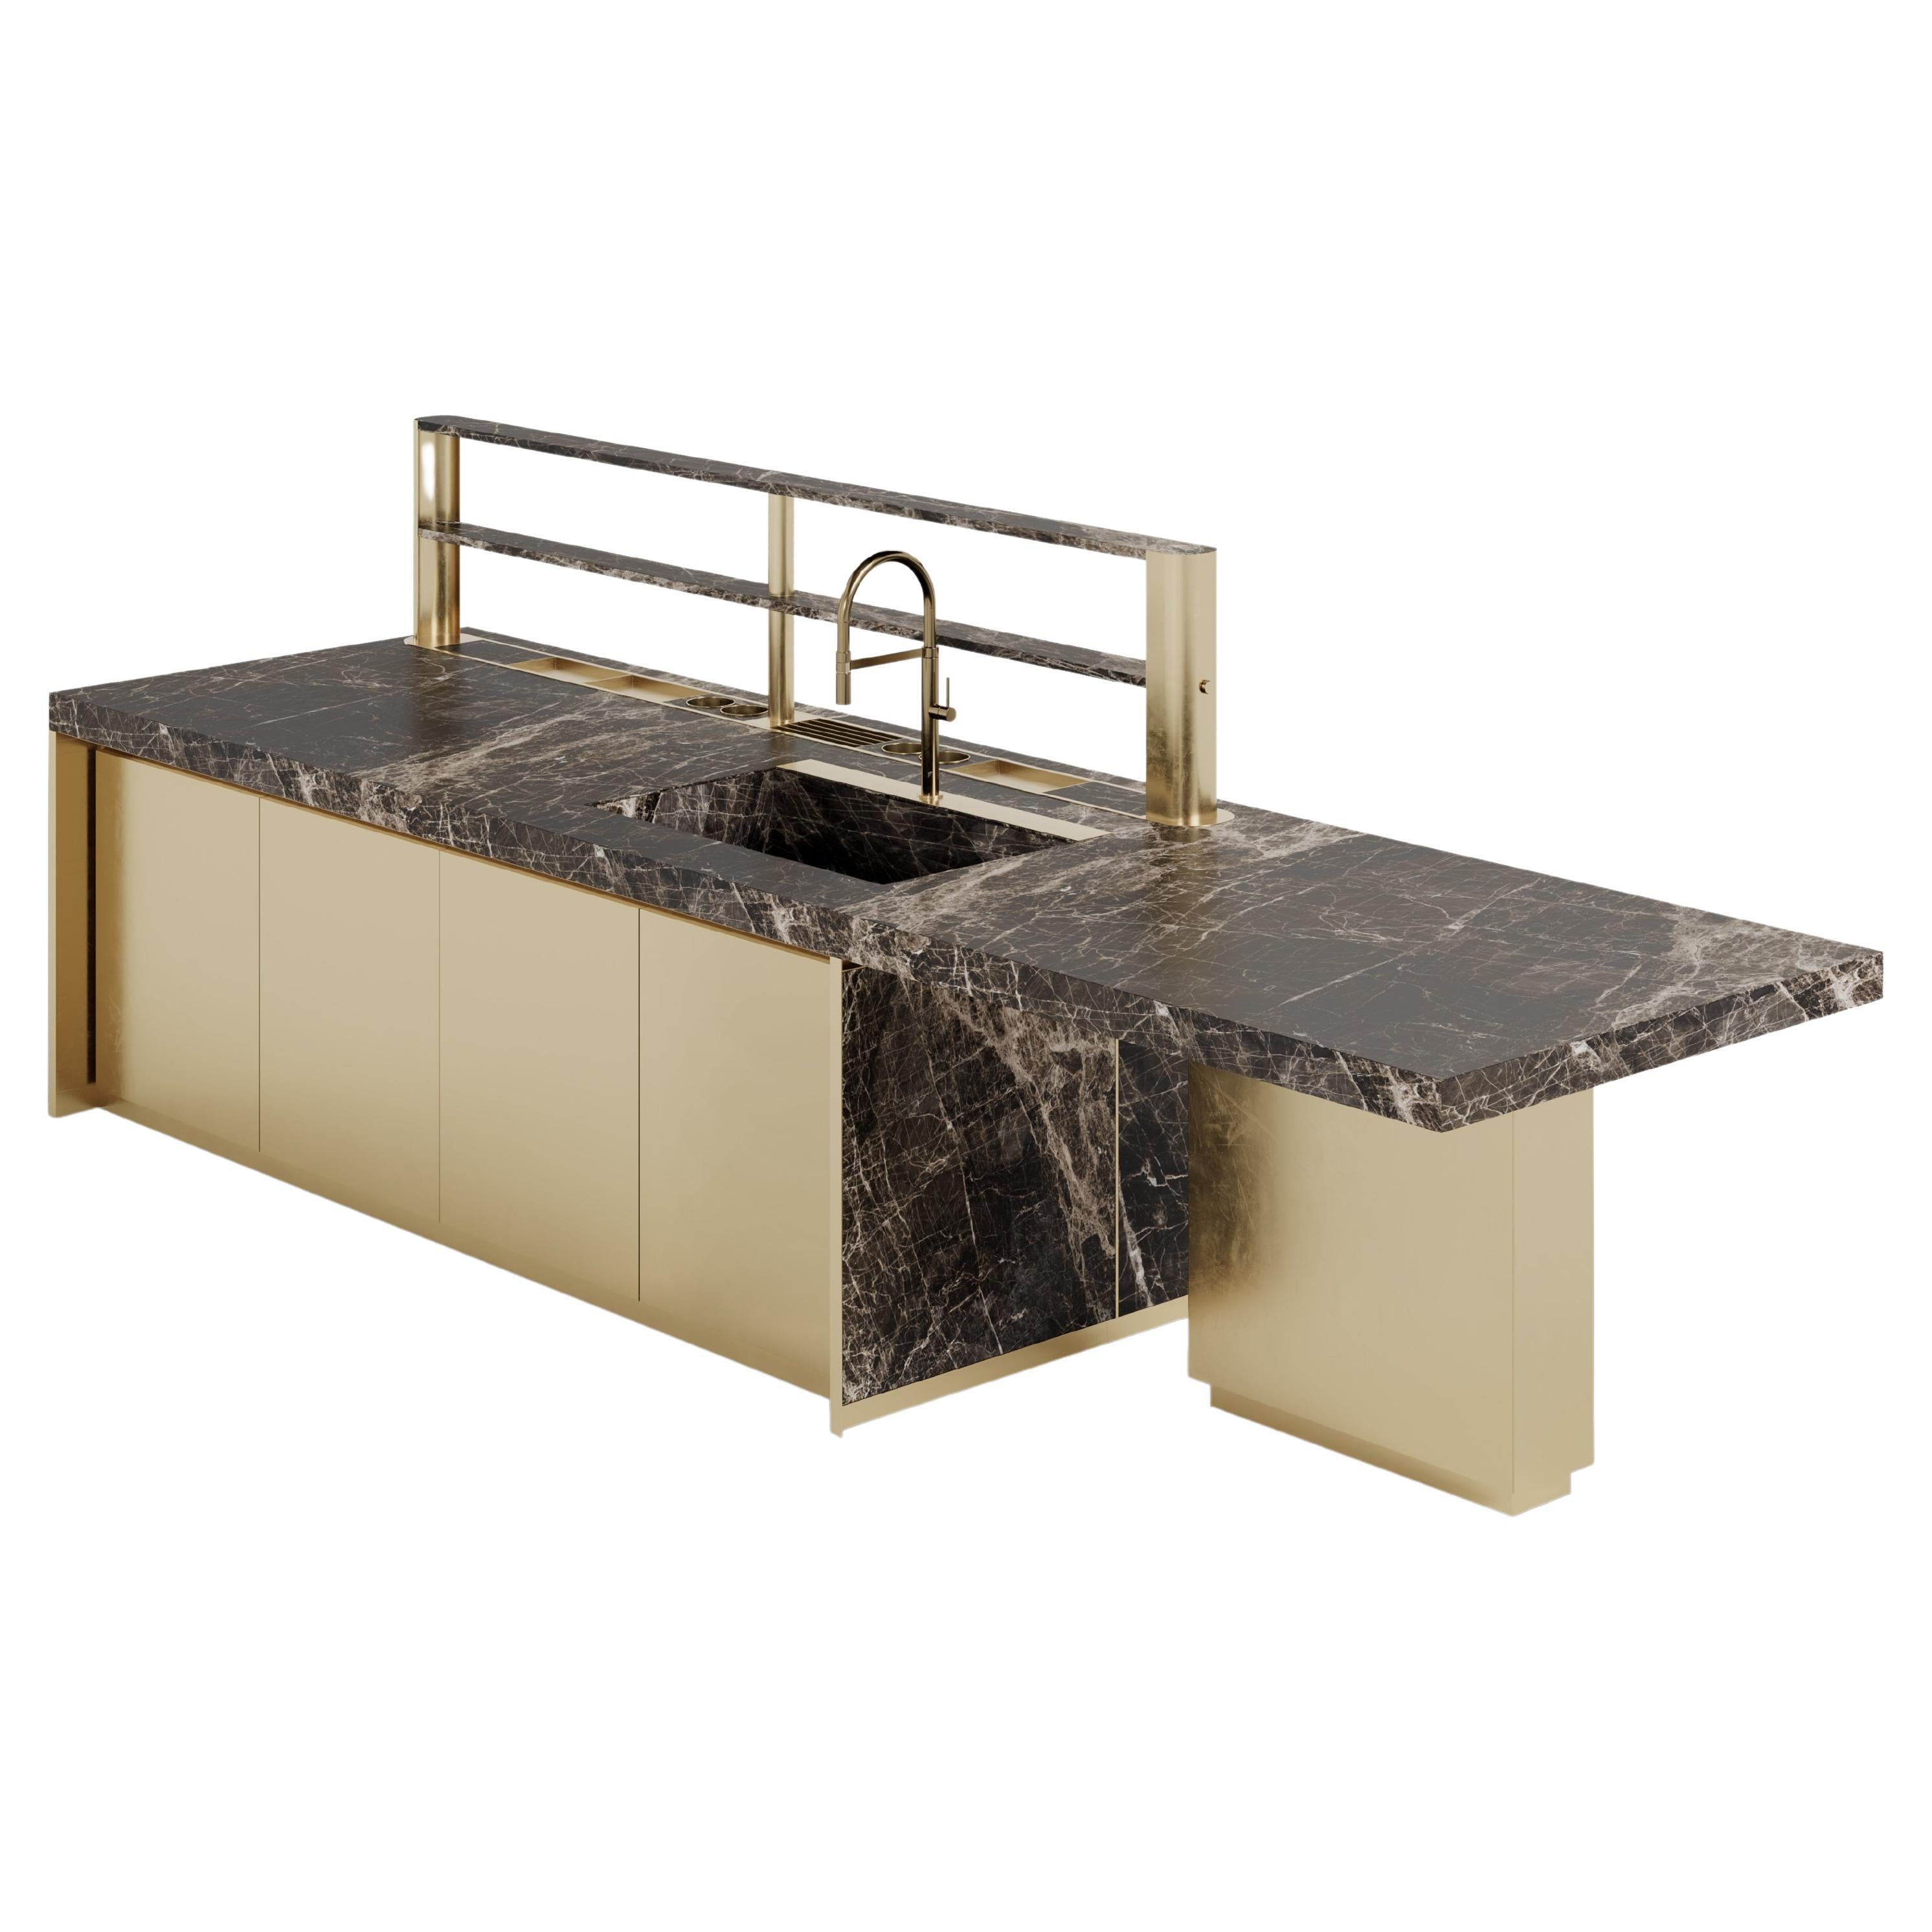 Golden and Emperador Marble Outdoor Kitchen with doors and extension For Sale